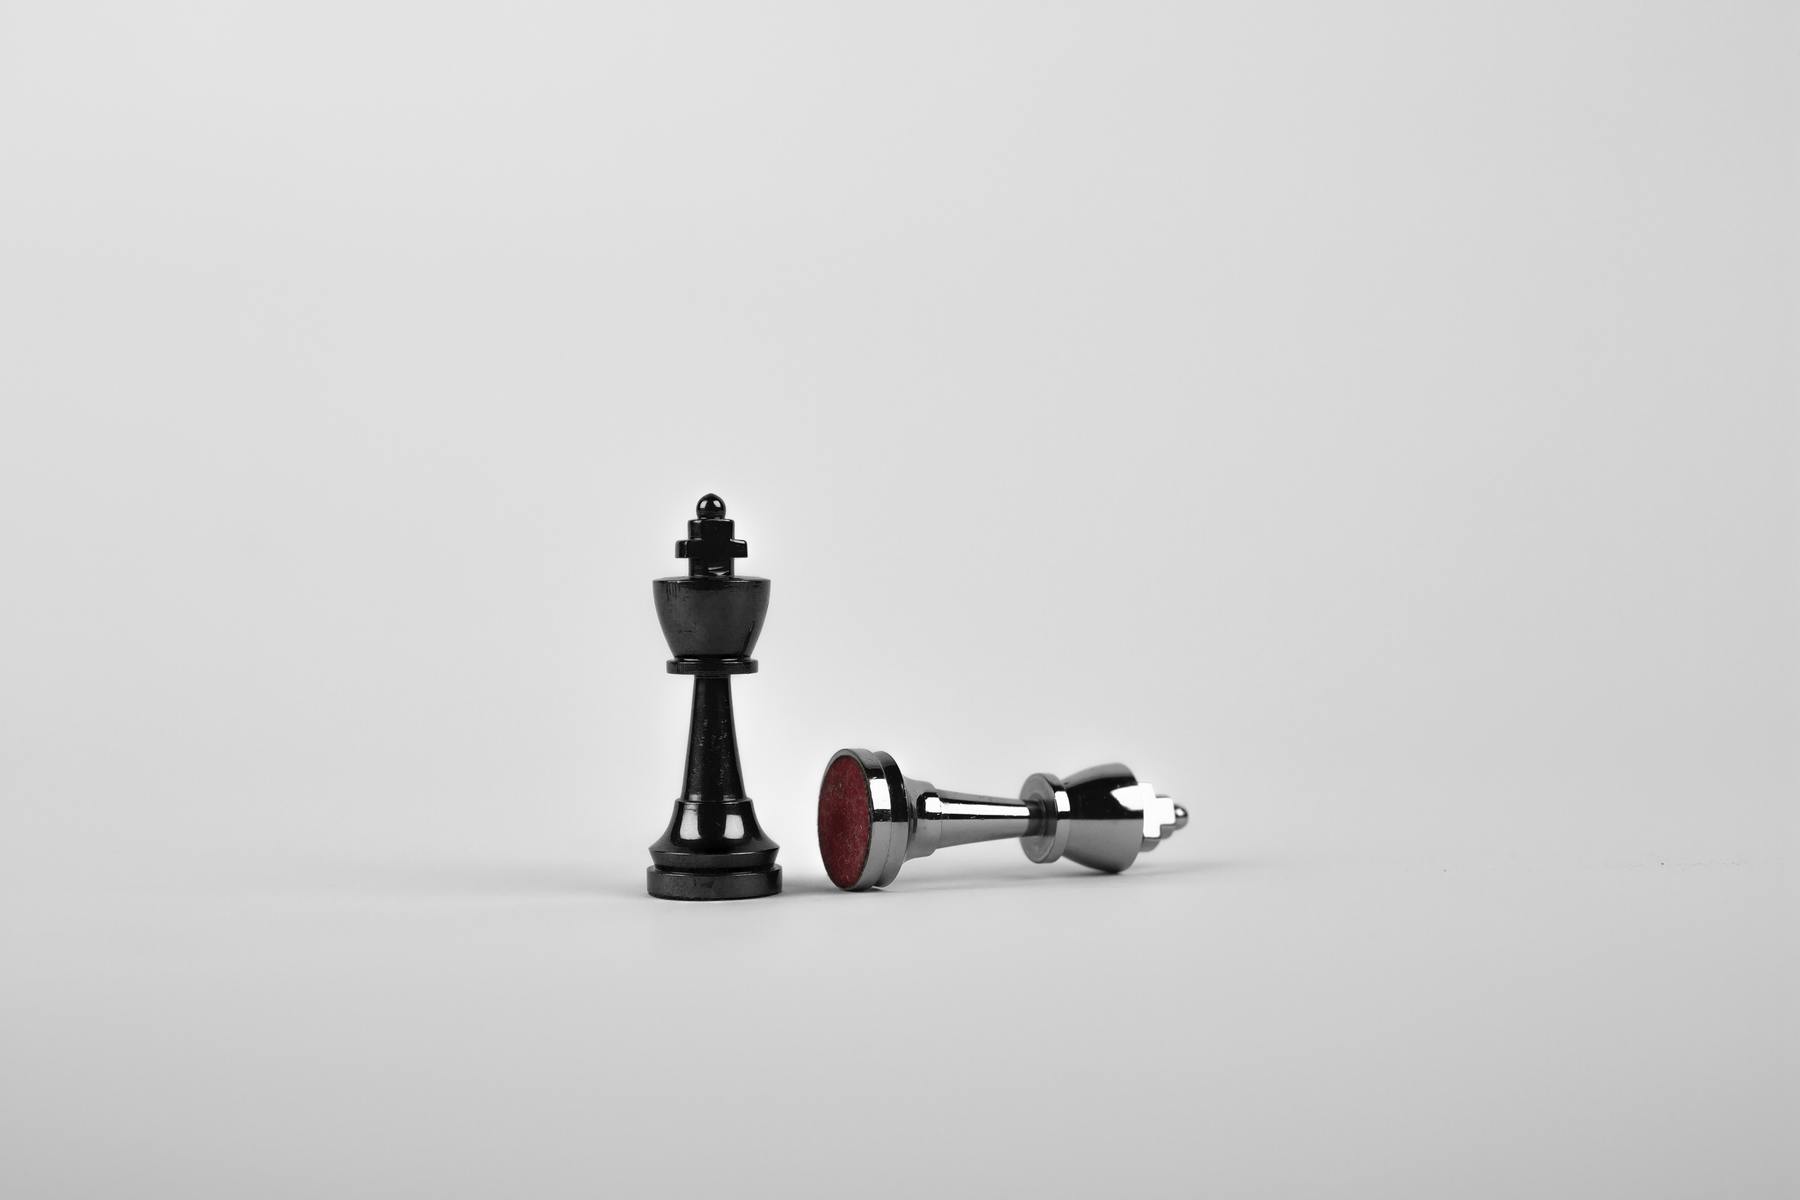 Two chess pieces on a blank white background, showing how culture eats strategy for breakfast.